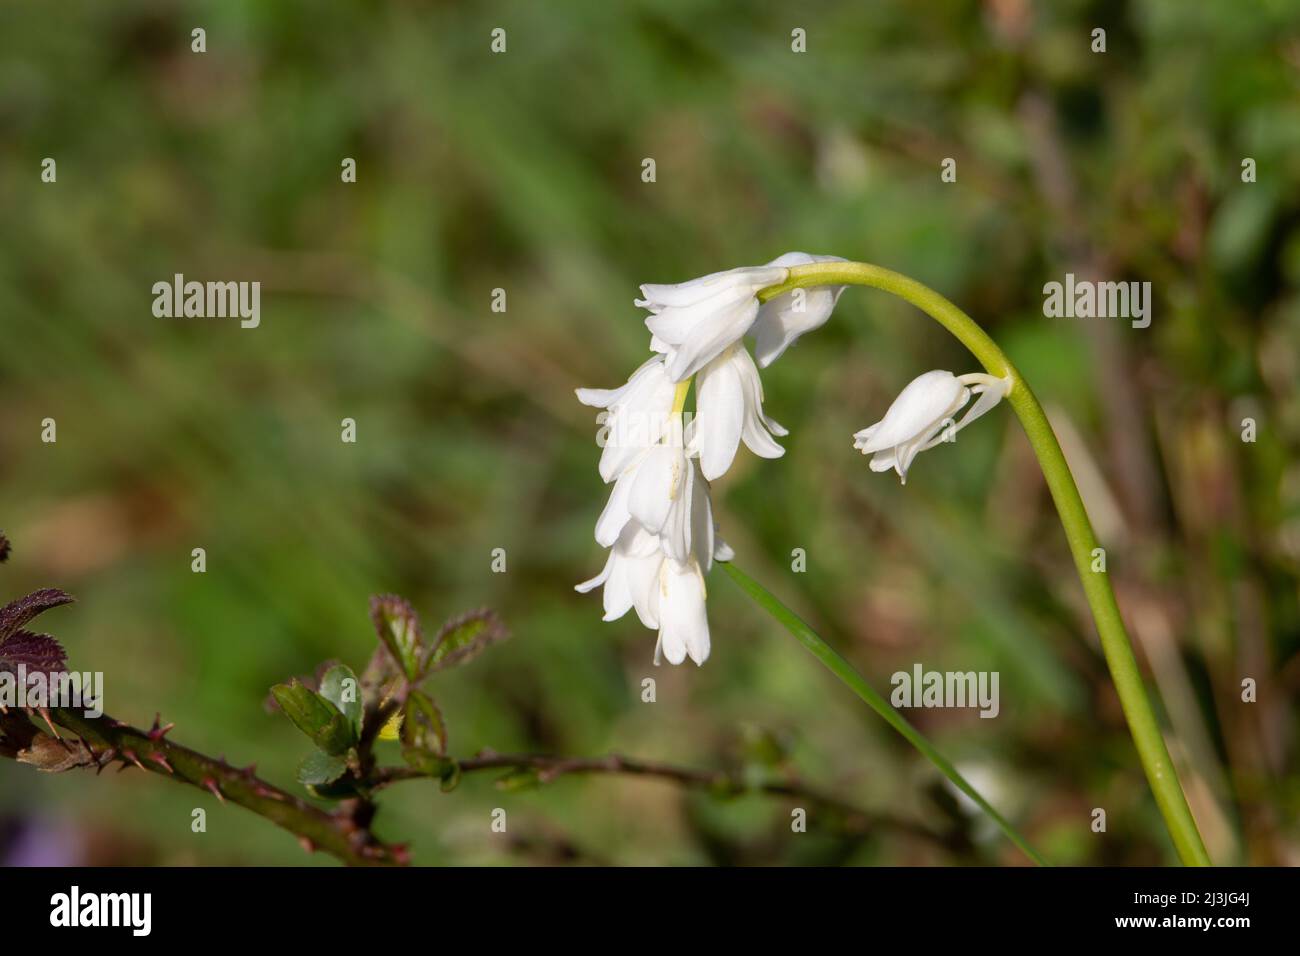 a genetic mutation creating a white Common Bluebell (Hyacinthoides non-scripta) isolated on a natural green background Stock Photo